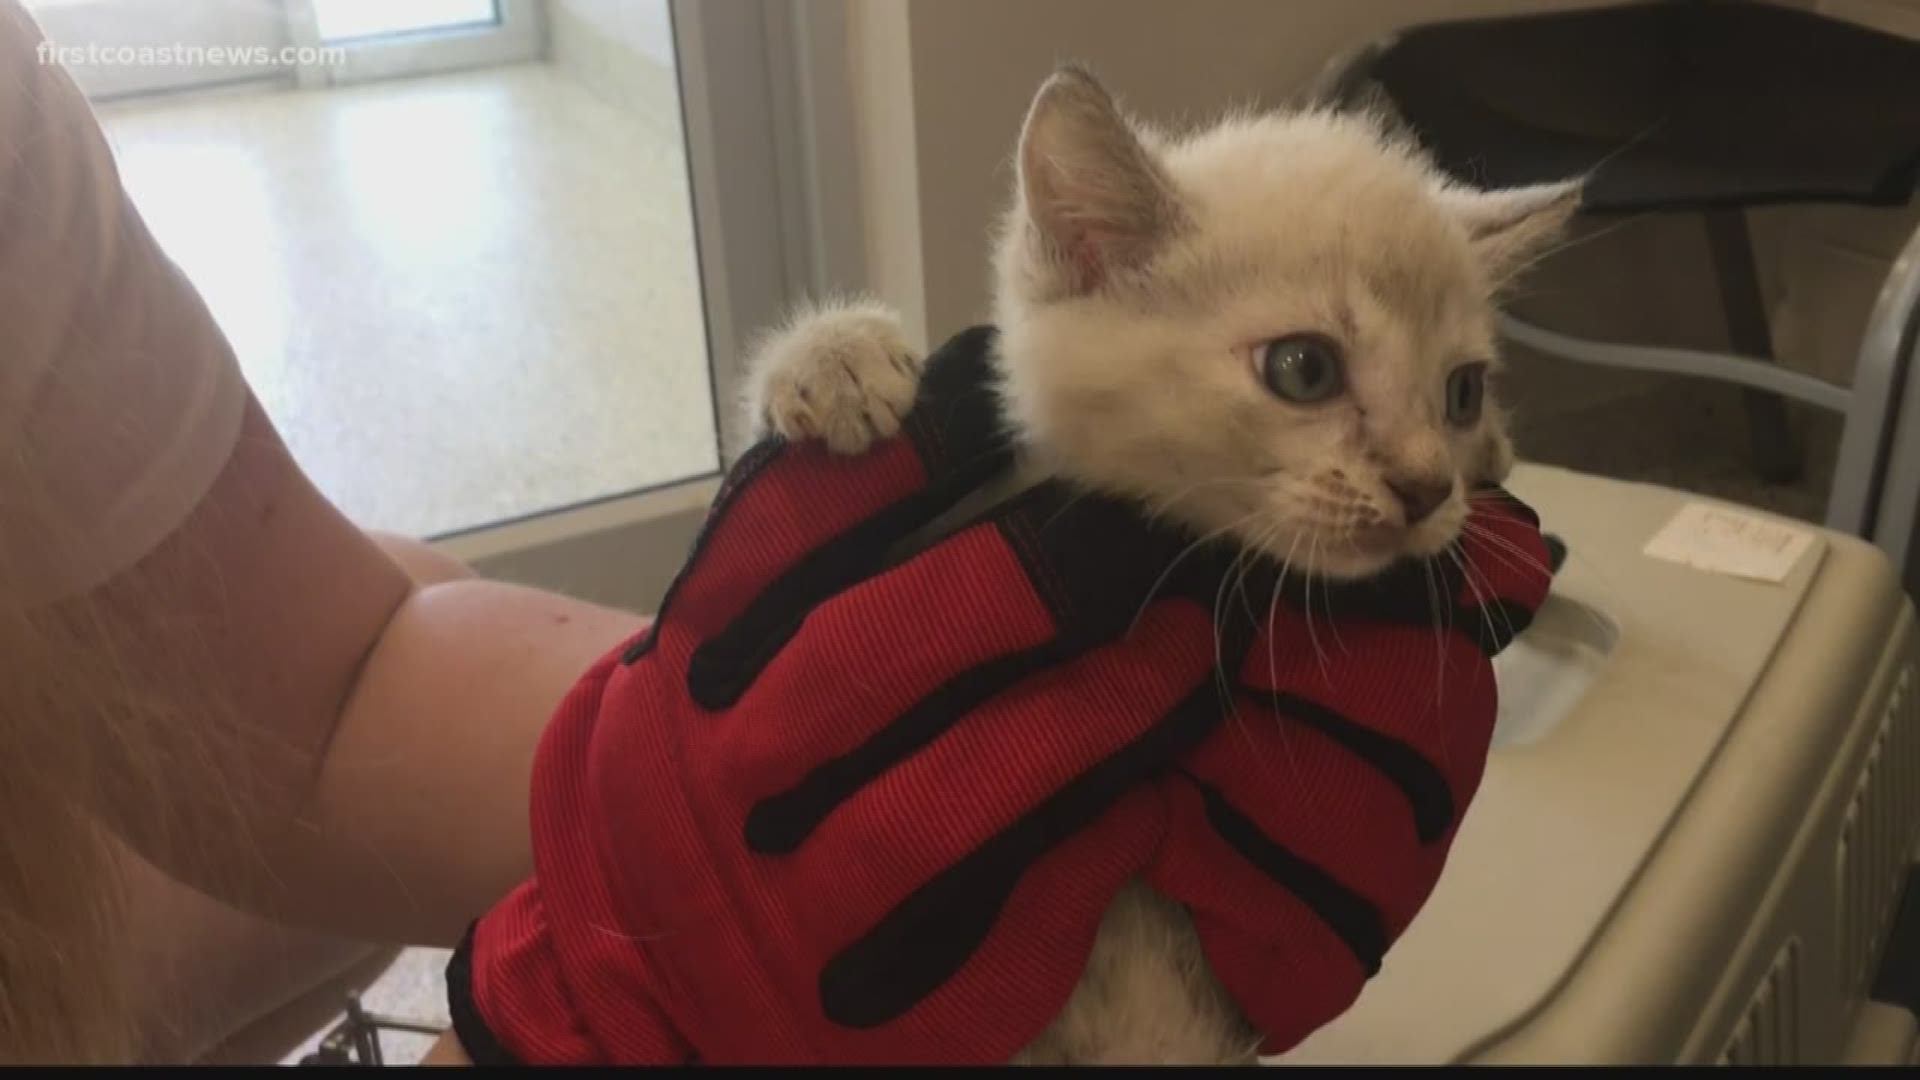 It's kitten season the First Coast and animal shelters are struggling.